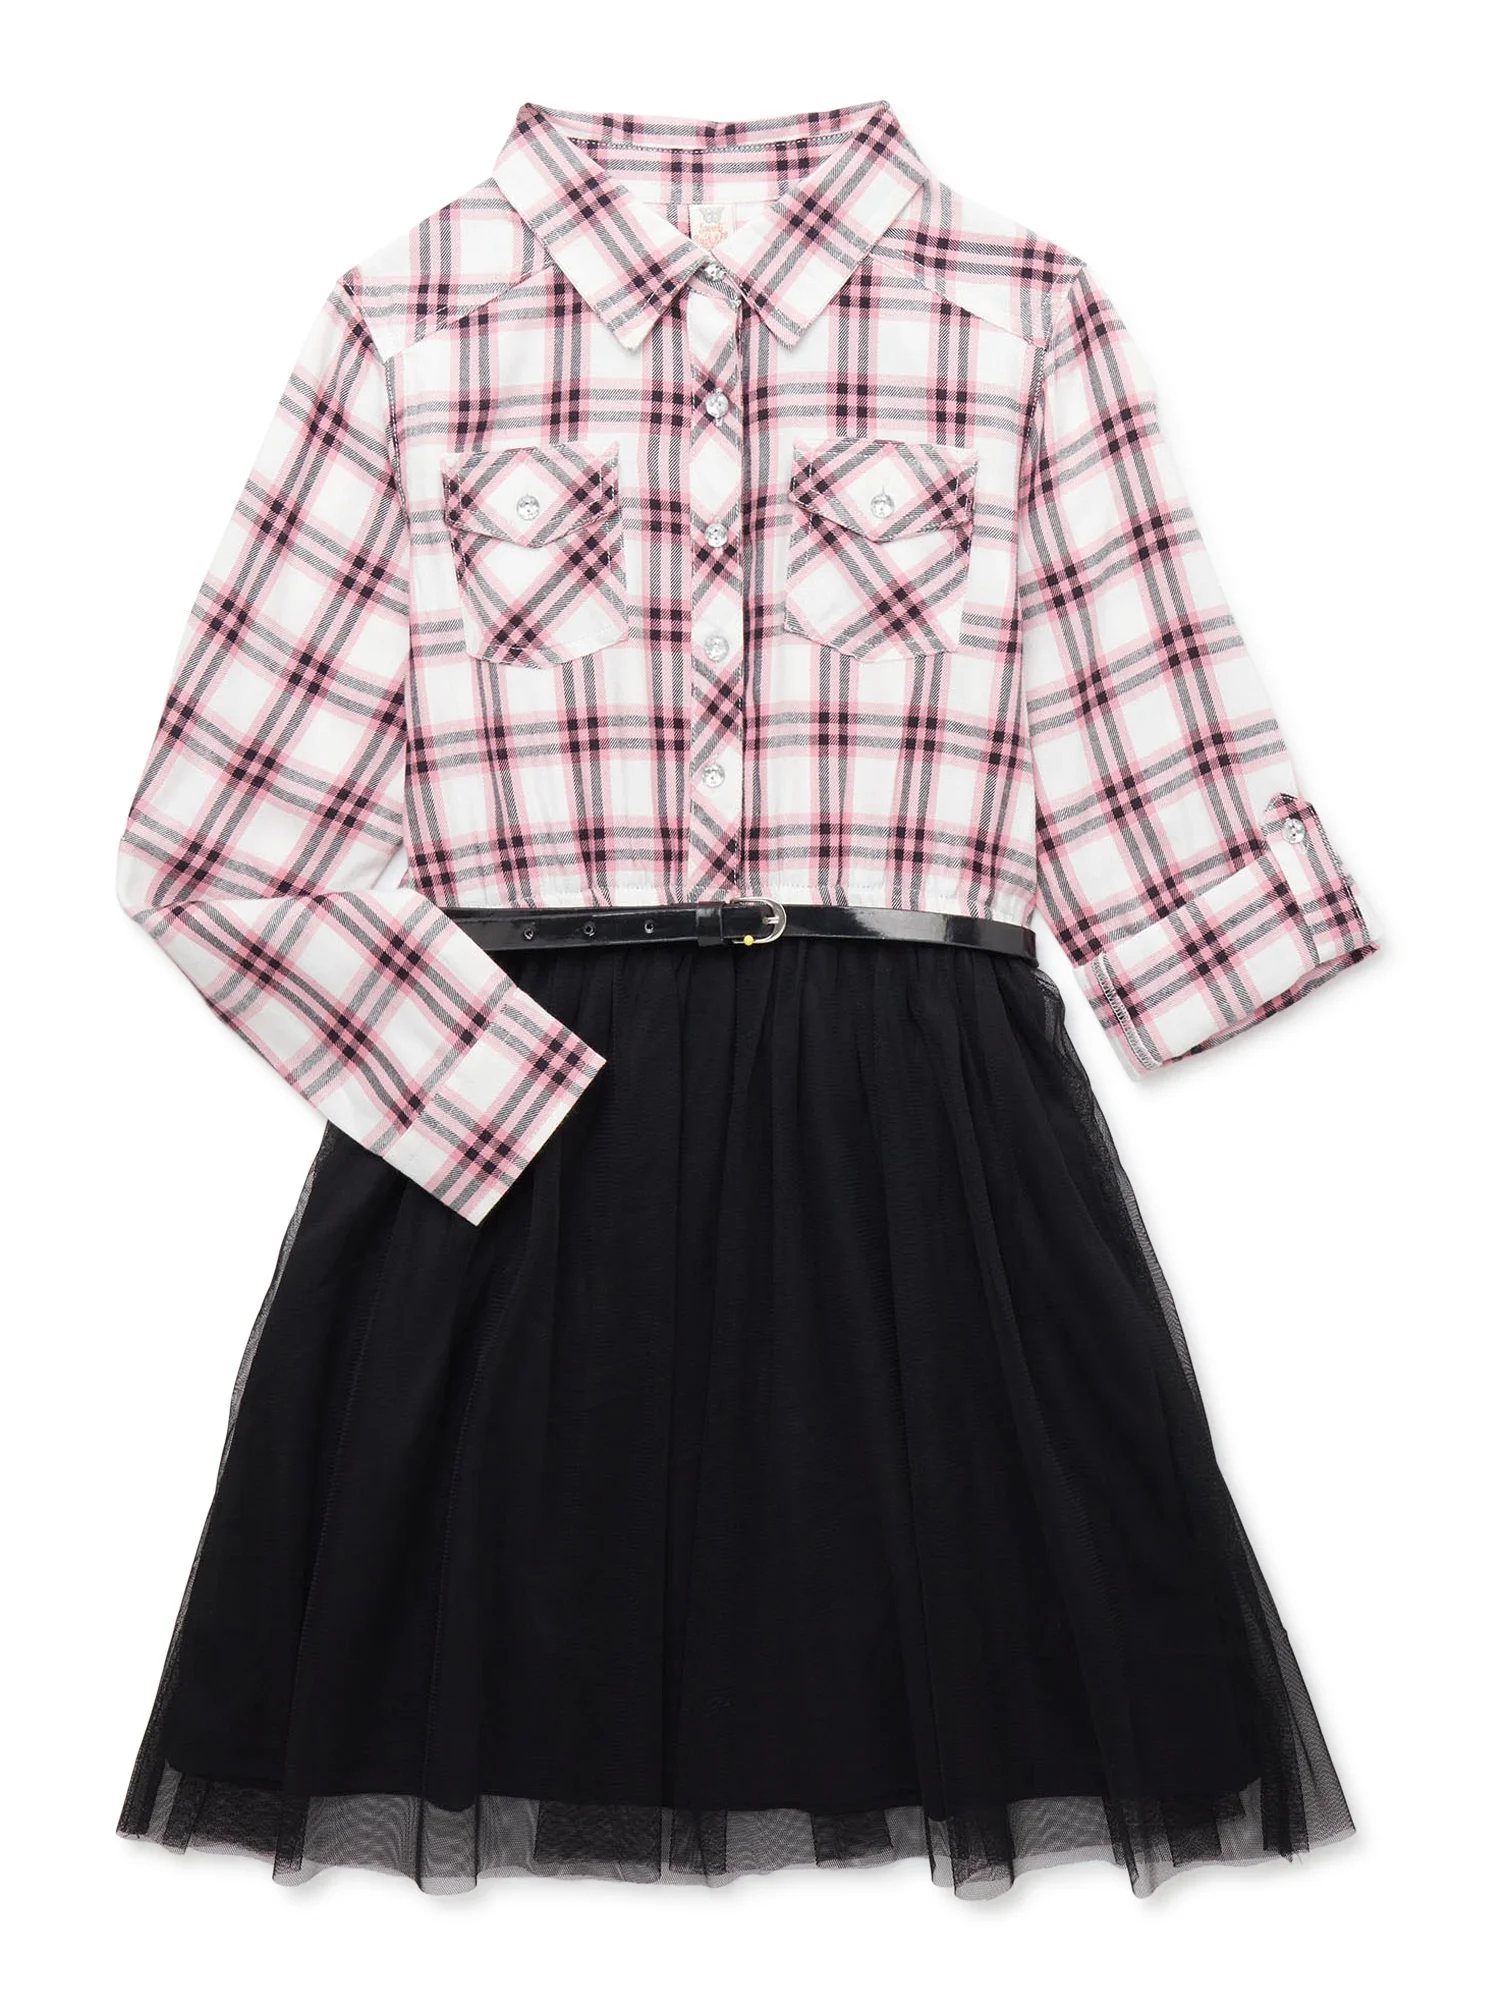 Sweet Butterfly Girls Long Sleeve Plaid and Tulle Dress, Sizes 4-16